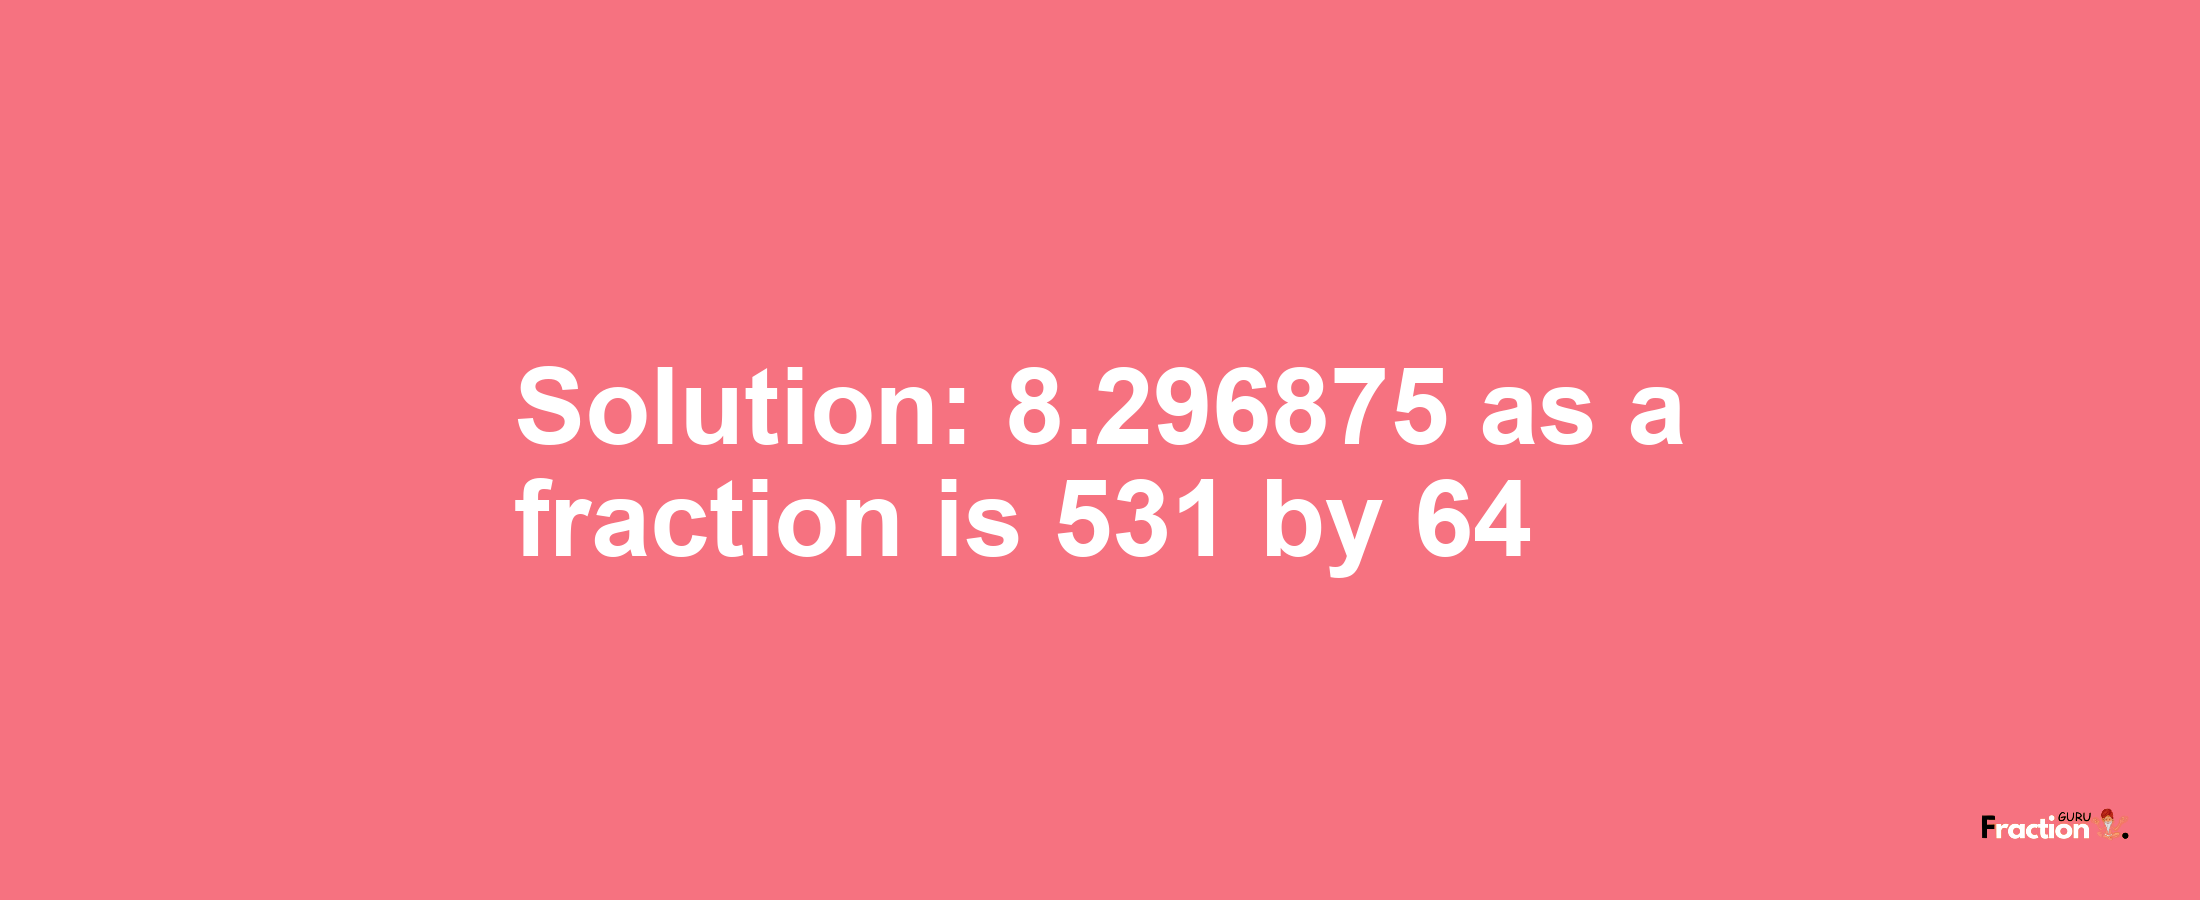 Solution:8.296875 as a fraction is 531/64